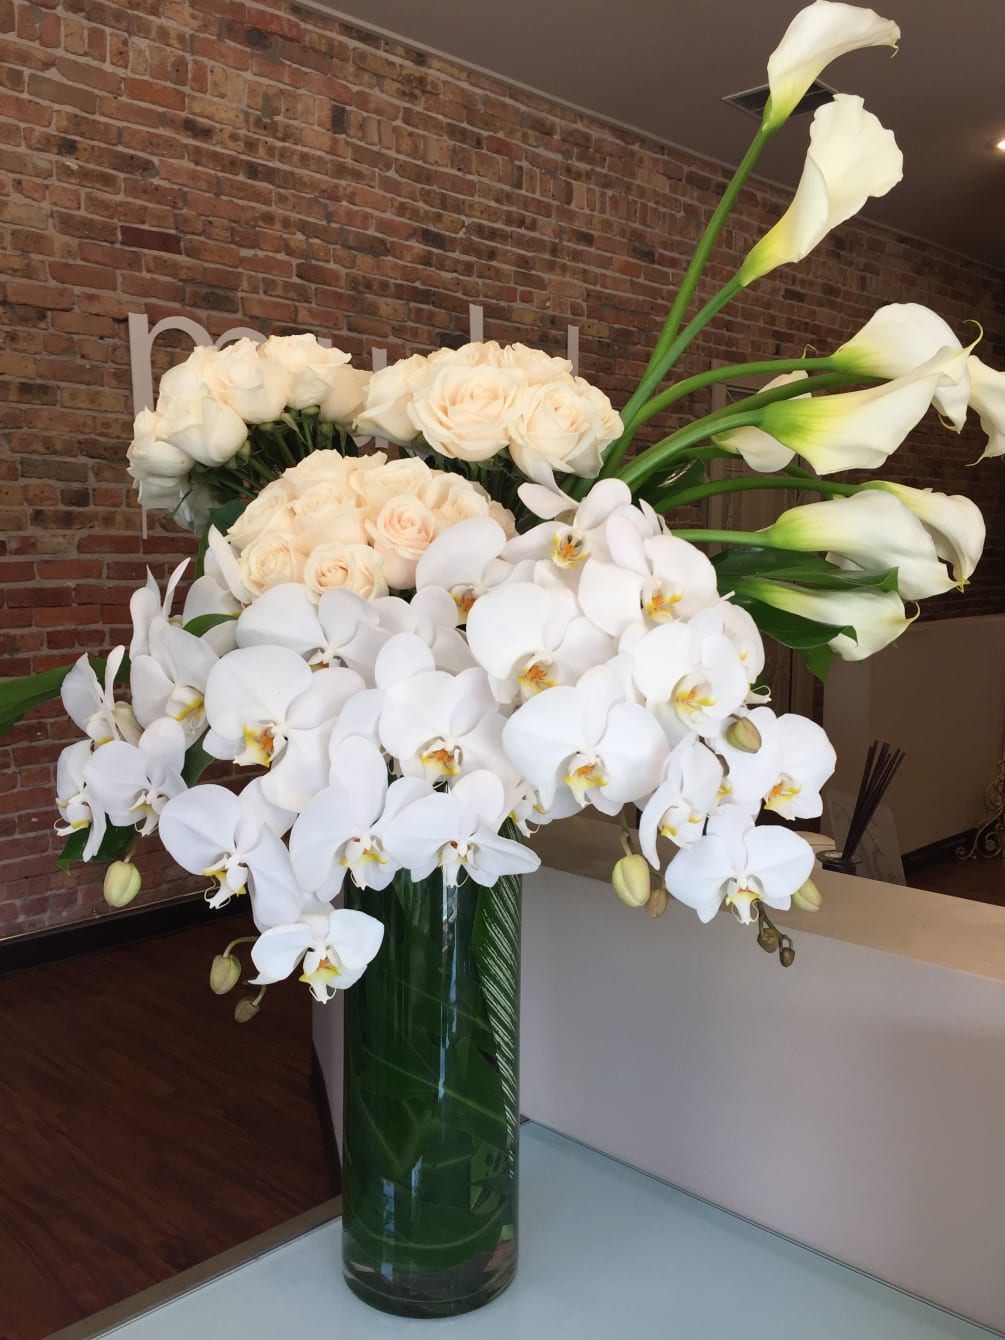 A lush explosion of white flowers to include trumpet calla lilies, rose